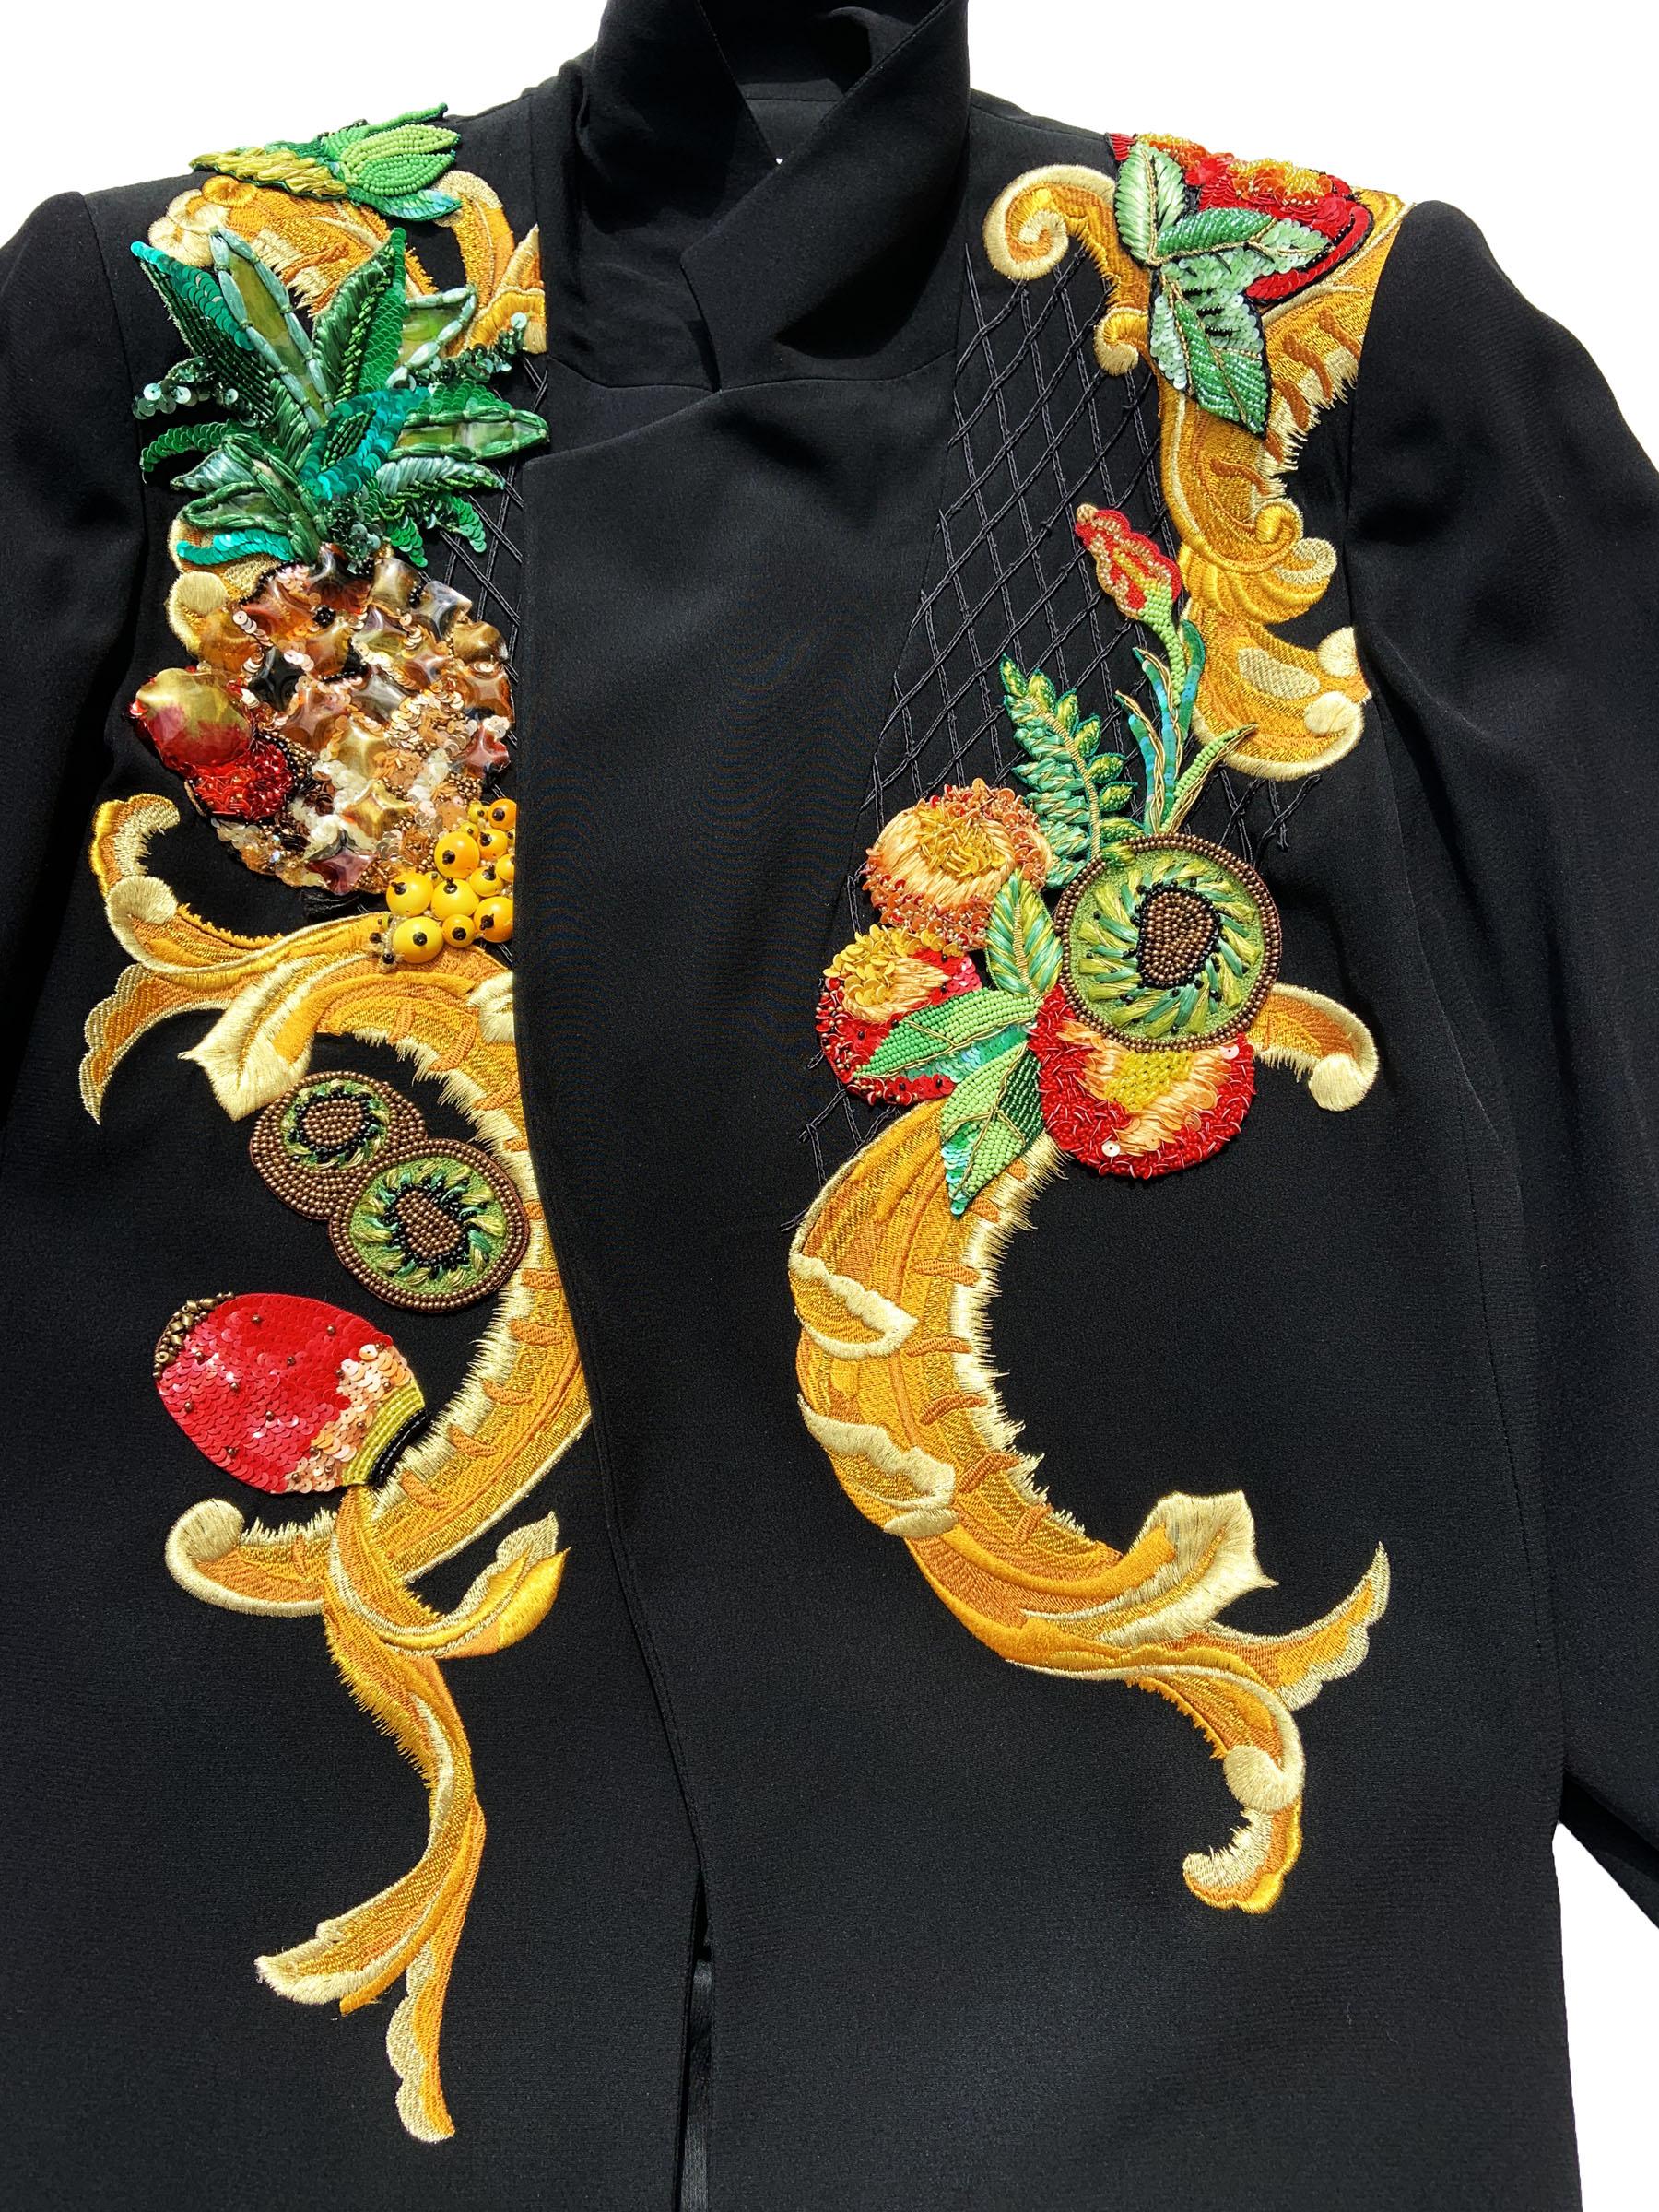  Christian Dior 1980's Numbered Beaded & Embroidered Long Blazer Jacket + Top  For Sale 3